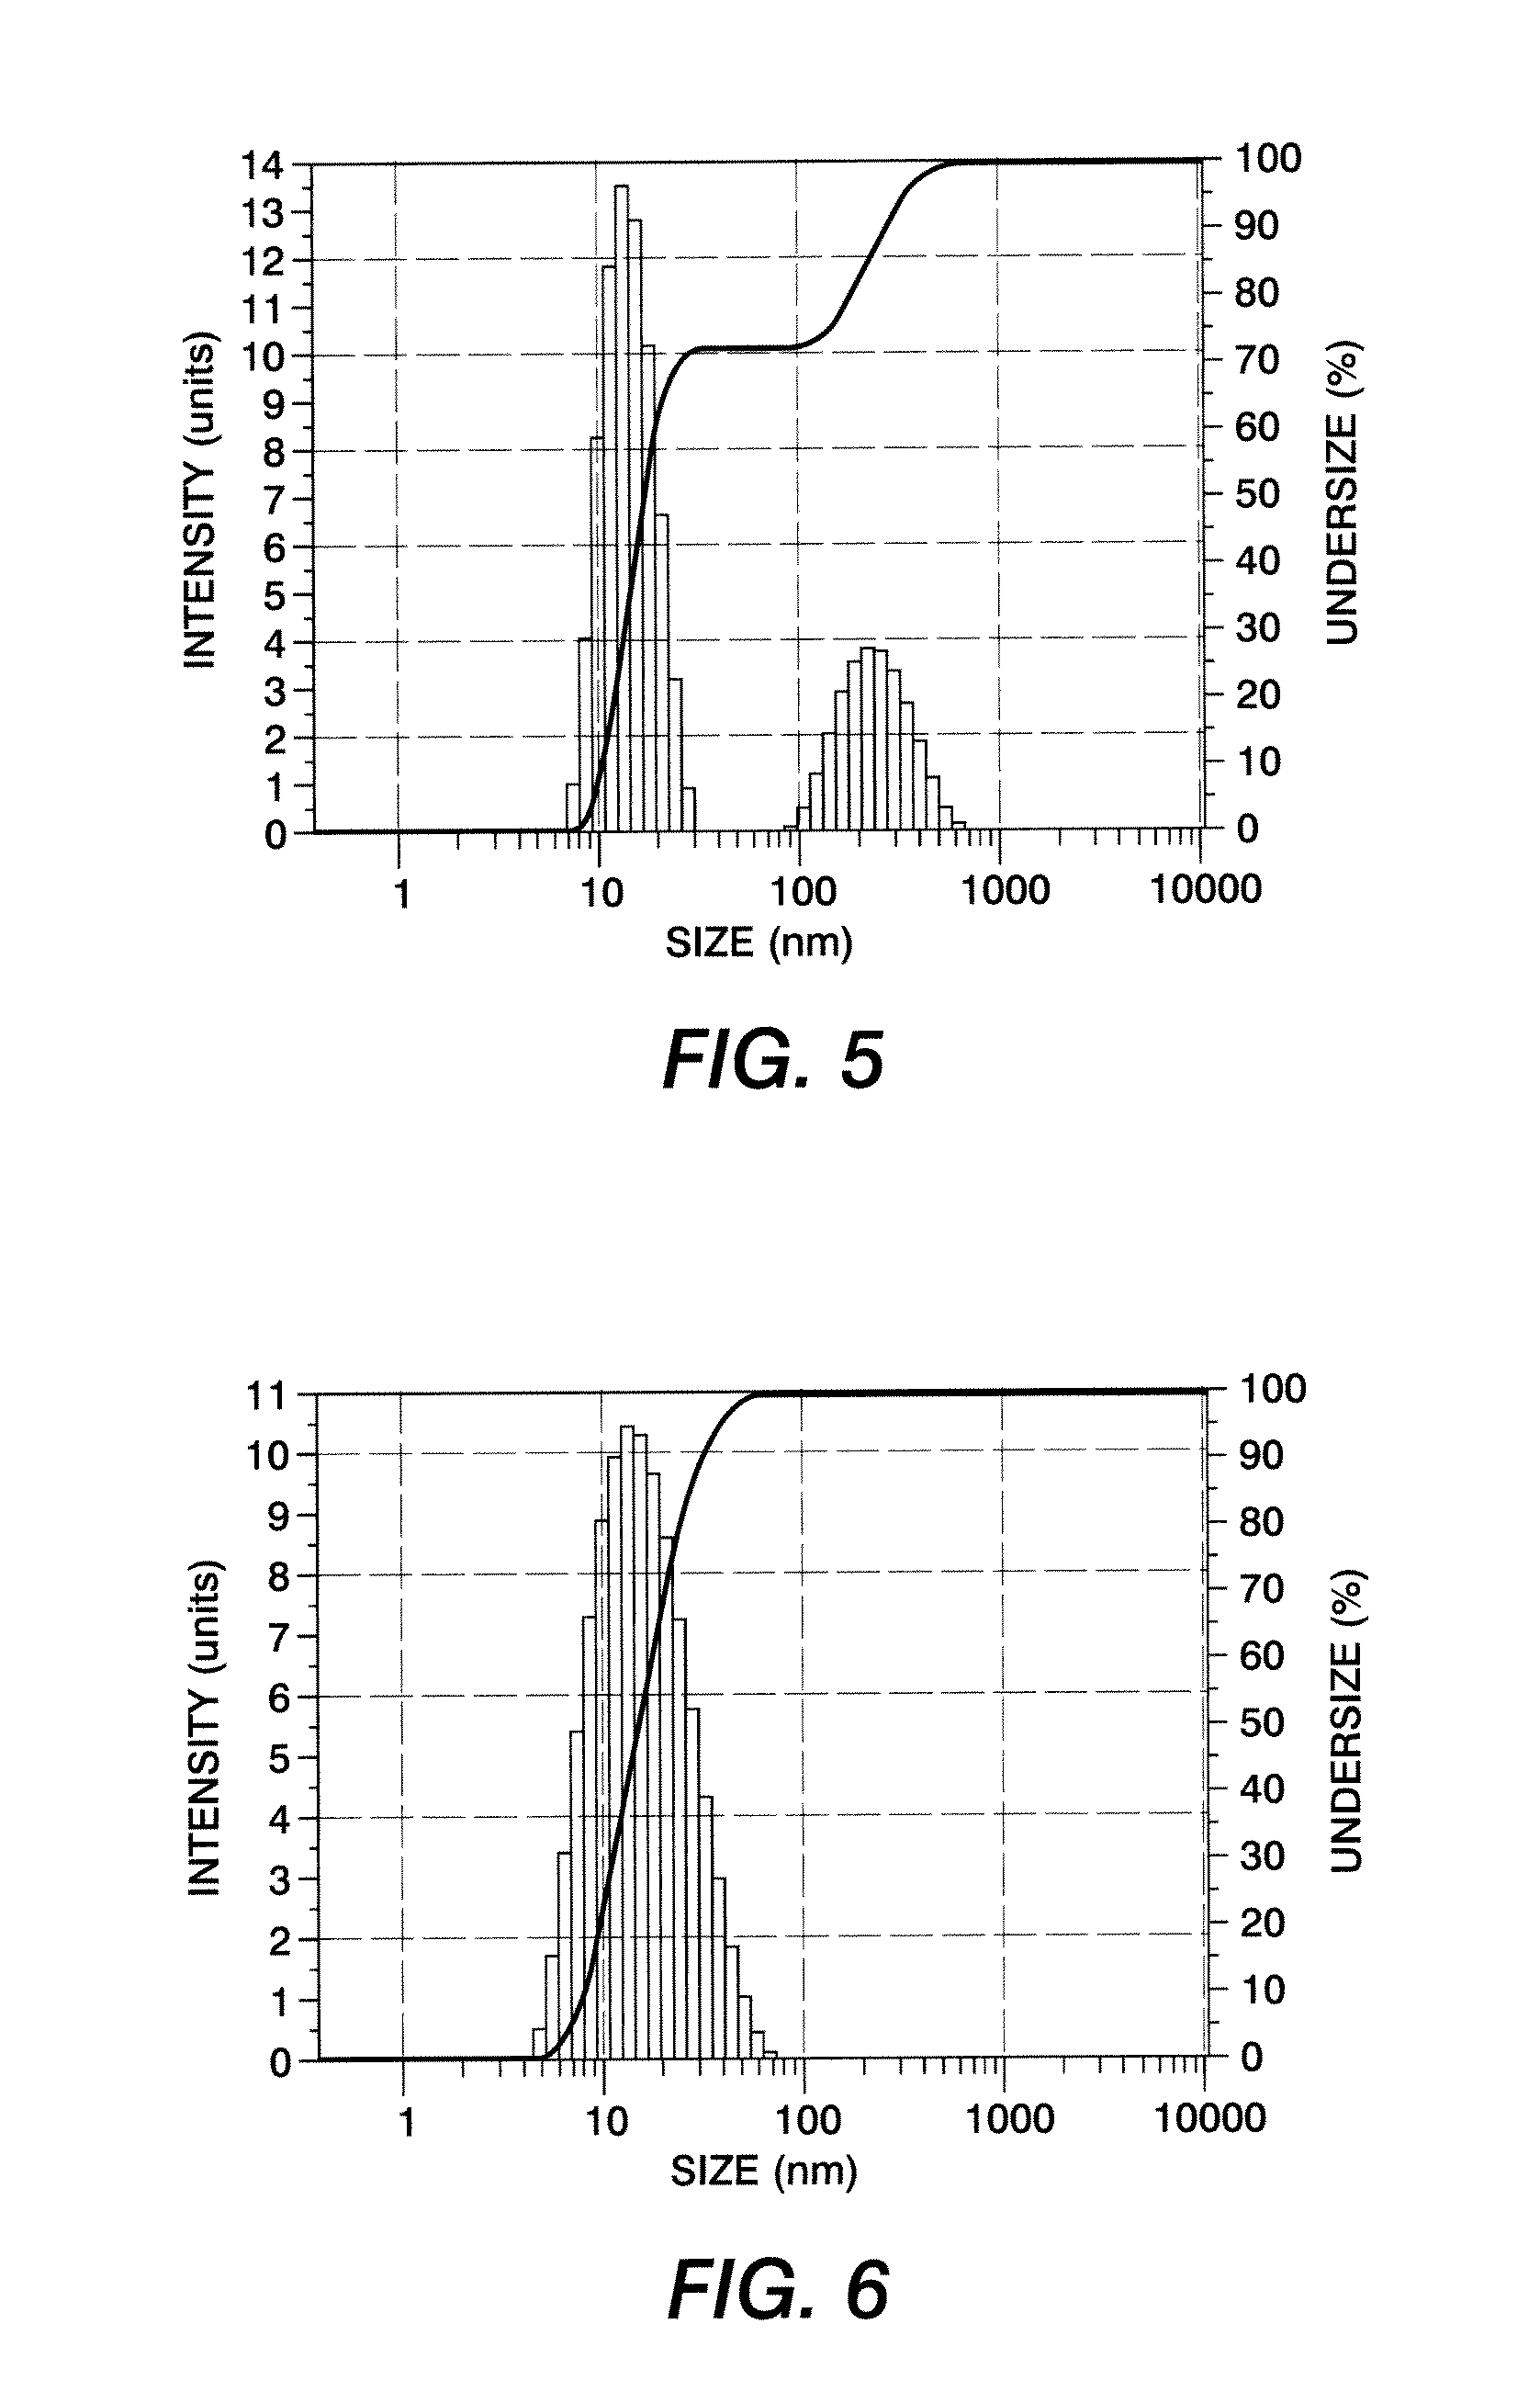 Methods for producing carboxylic acid stabilized silver nanoparticles